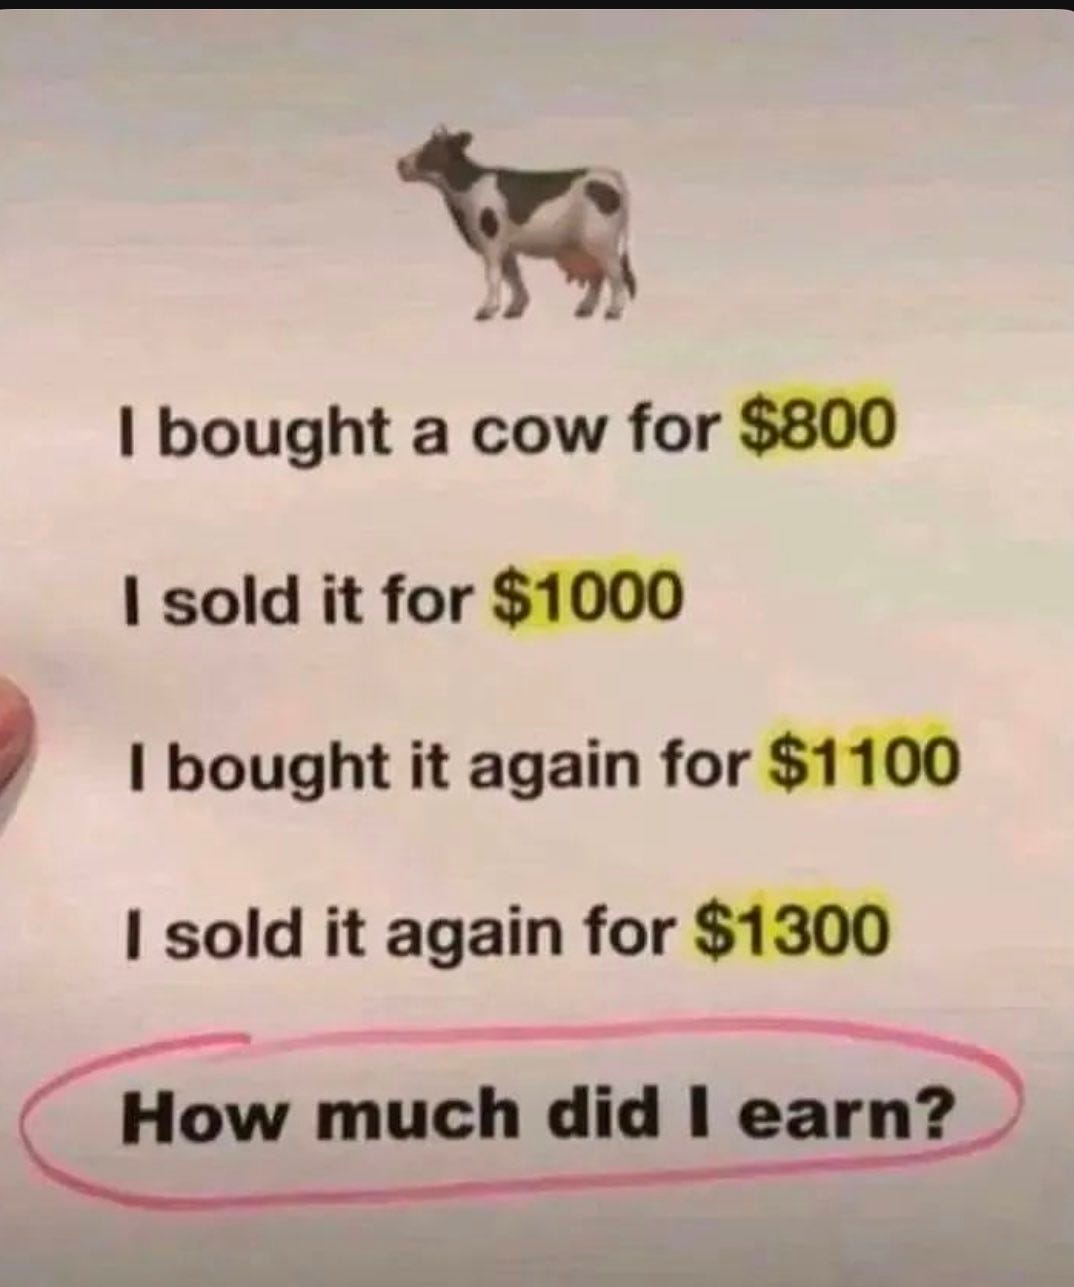 An image that says "I bought a cow for $800. I sold it for $1000. I bought it again for $1100. I sold it again for $1300. How much did I earn?"